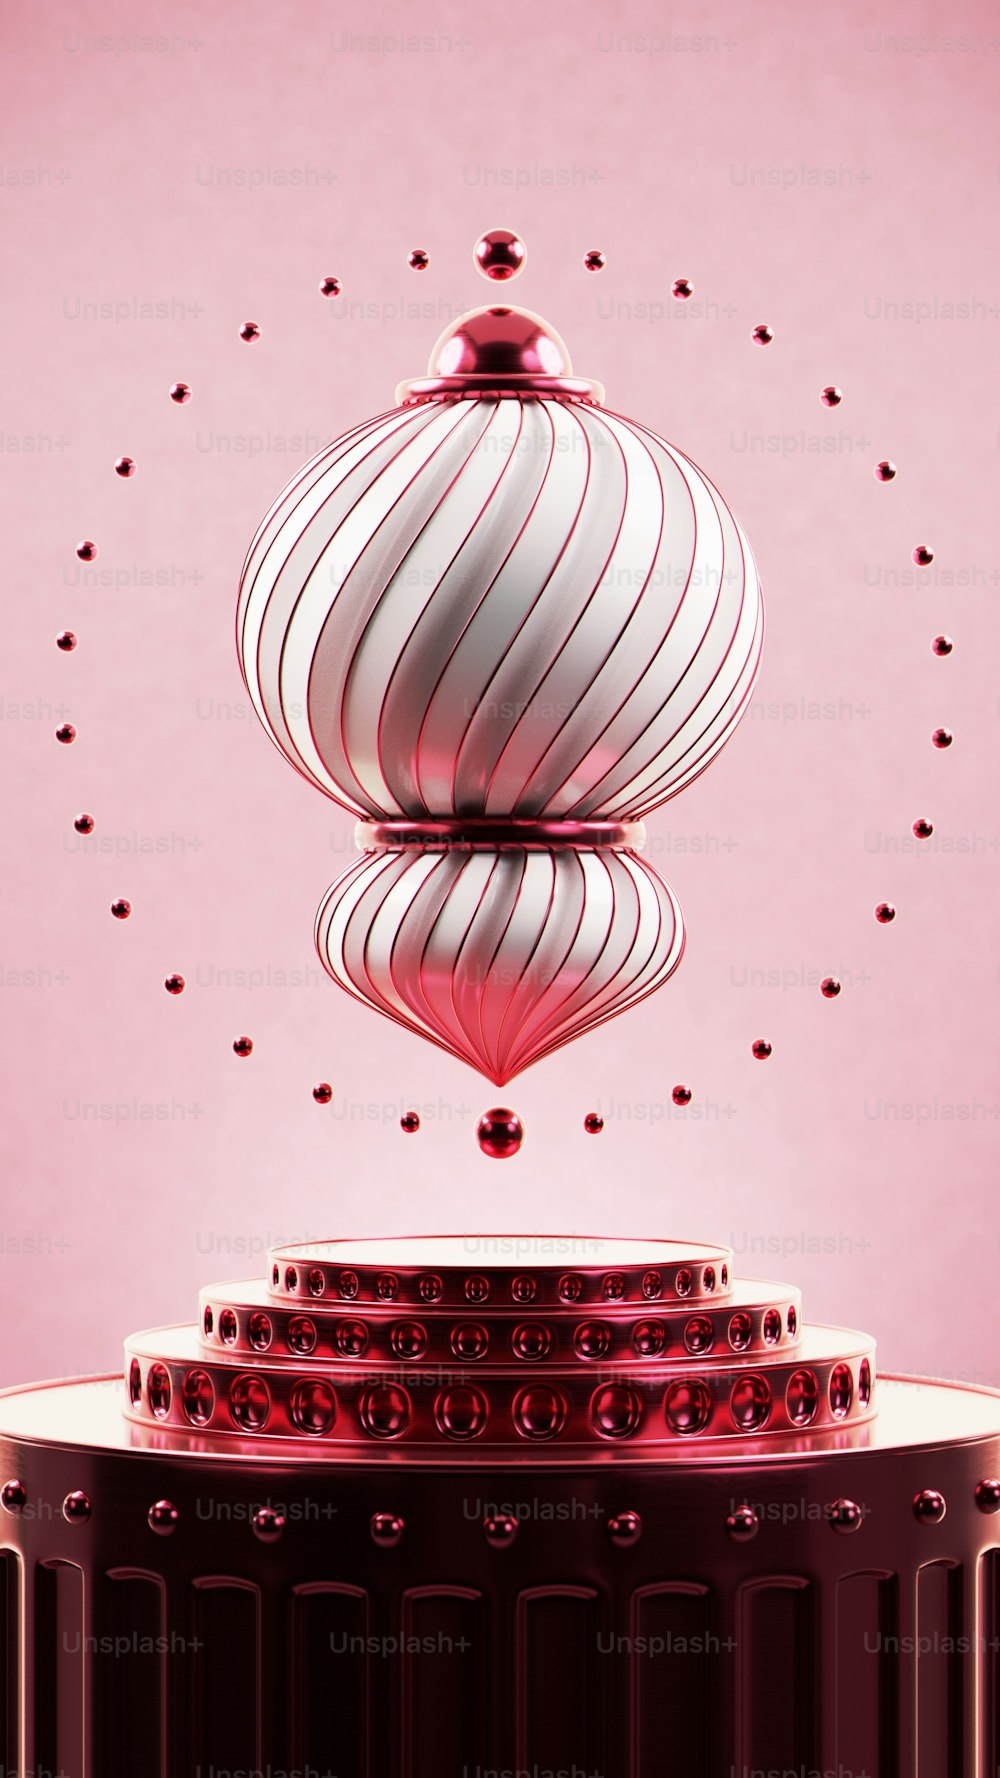 a red and white circular object with a pink background